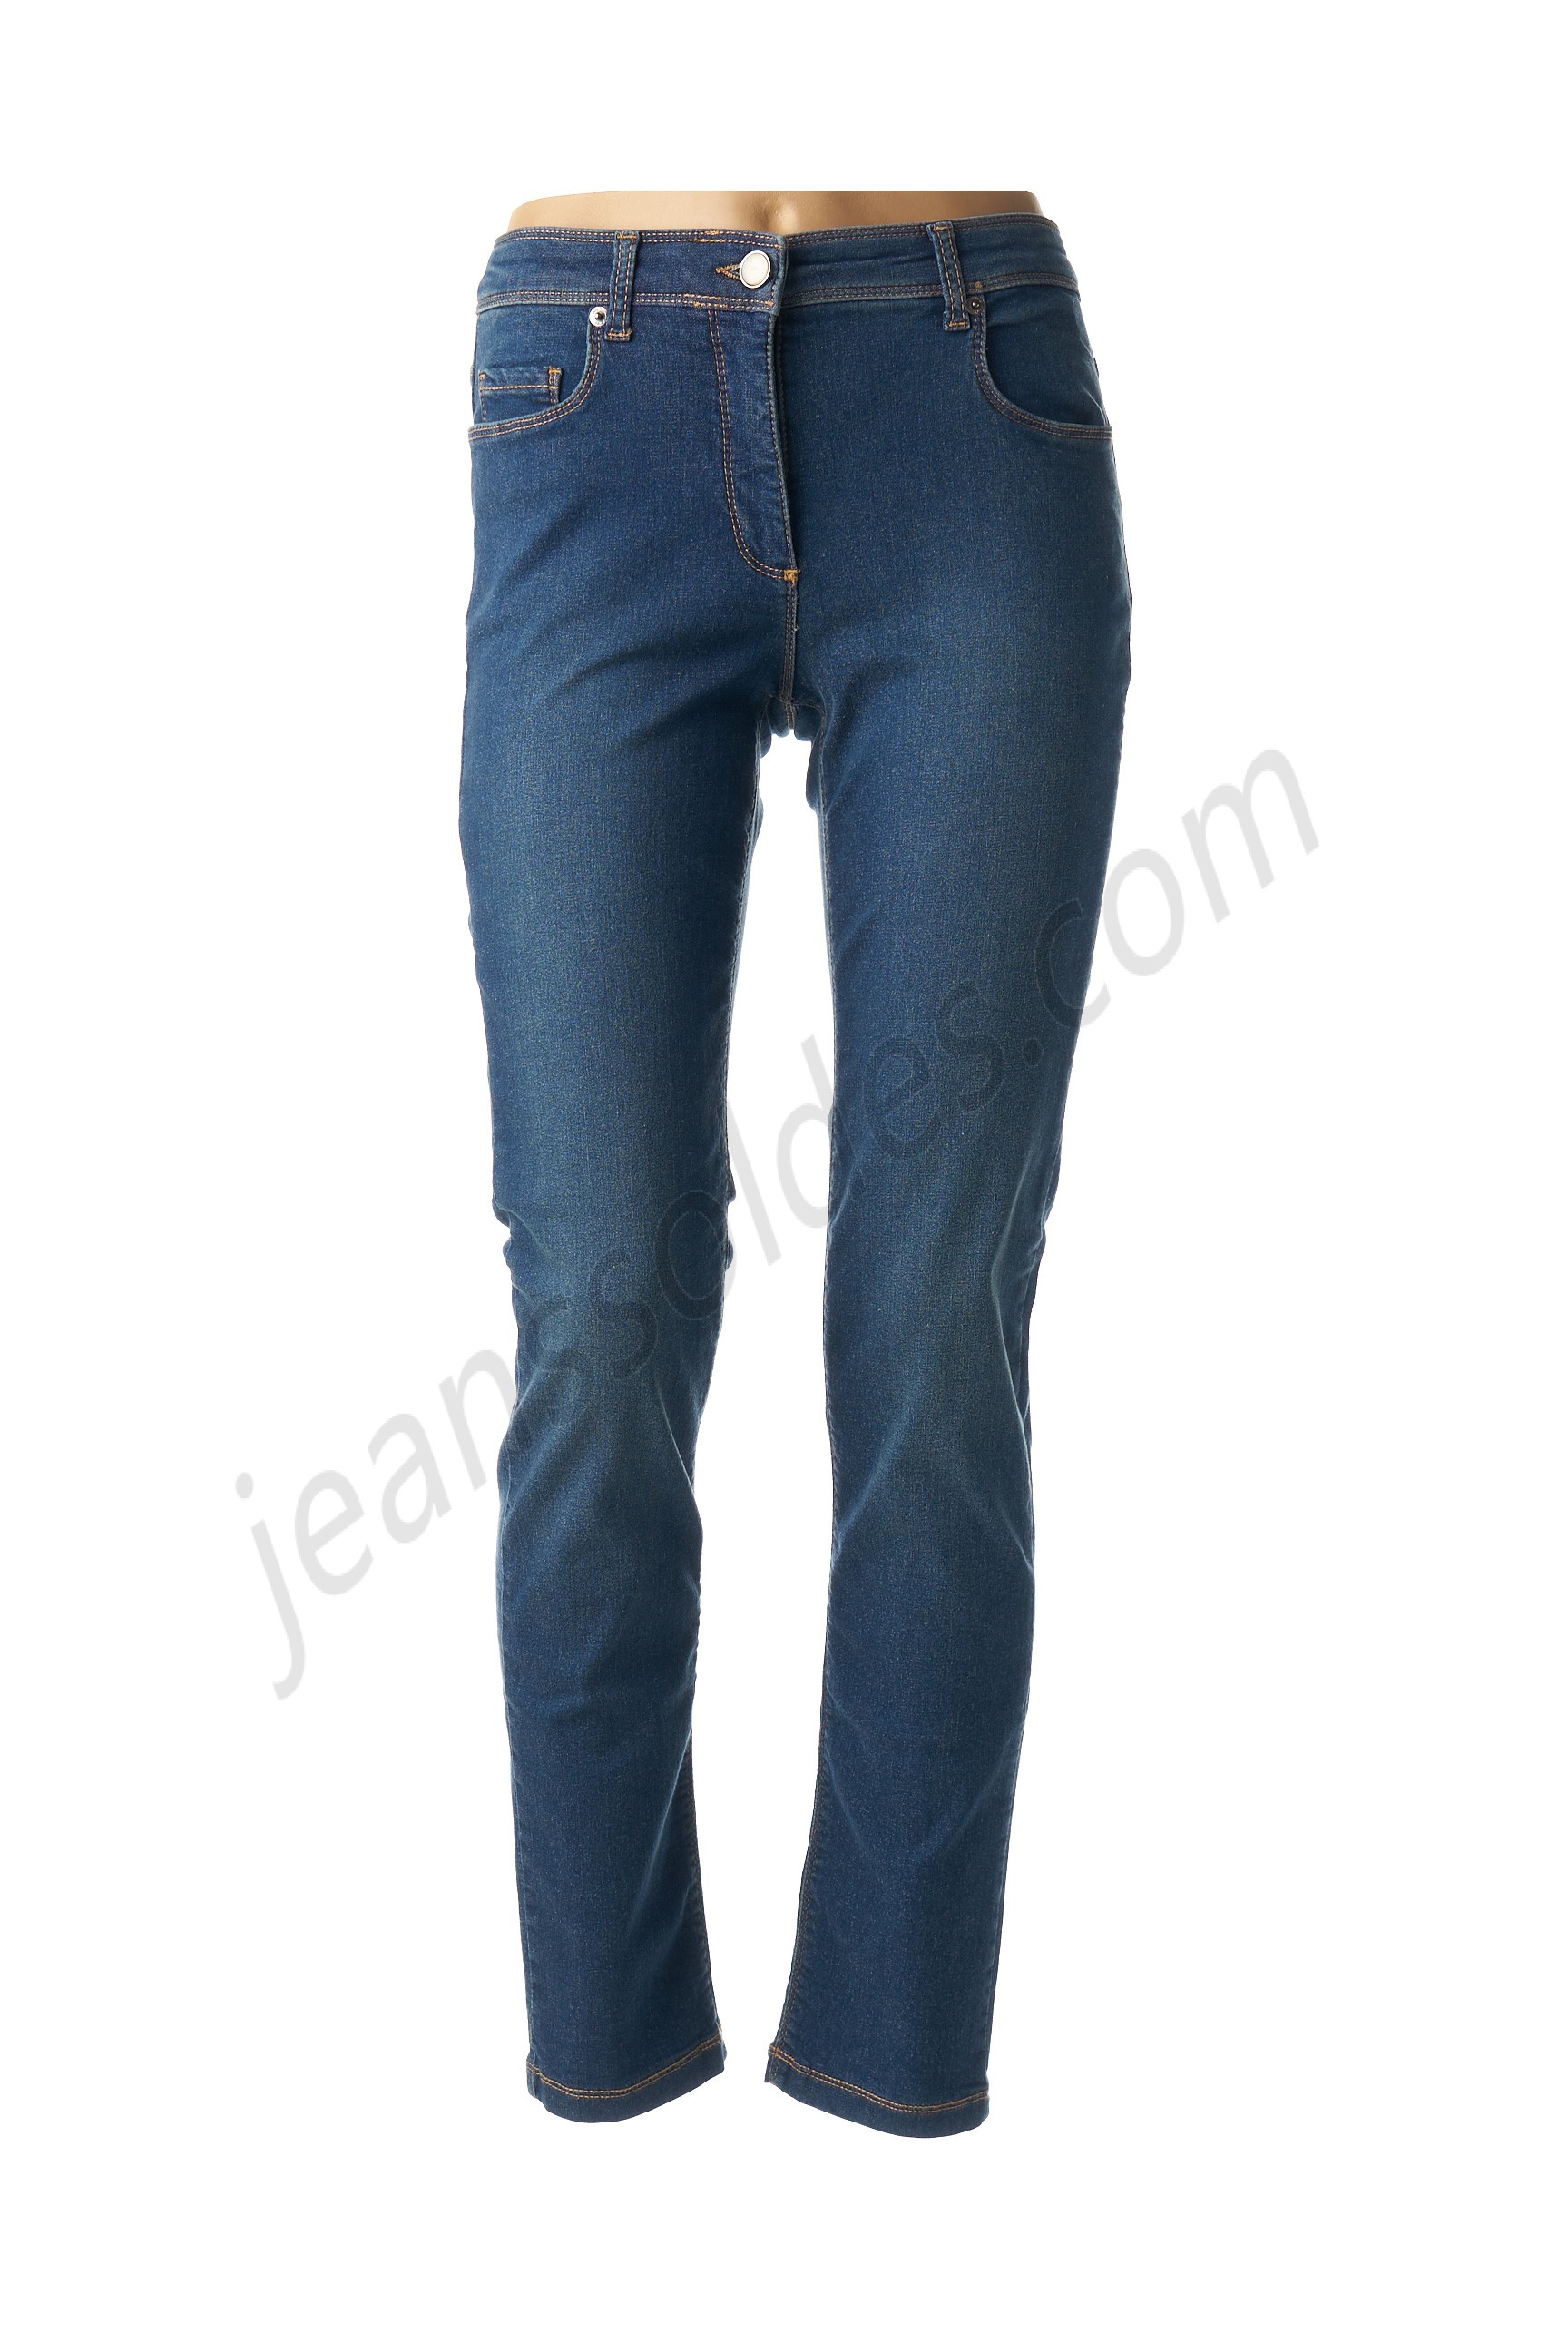 betty barclay-Jeans coupe slim prix d’amis - betty barclay-Jeans coupe slim prix d’amis